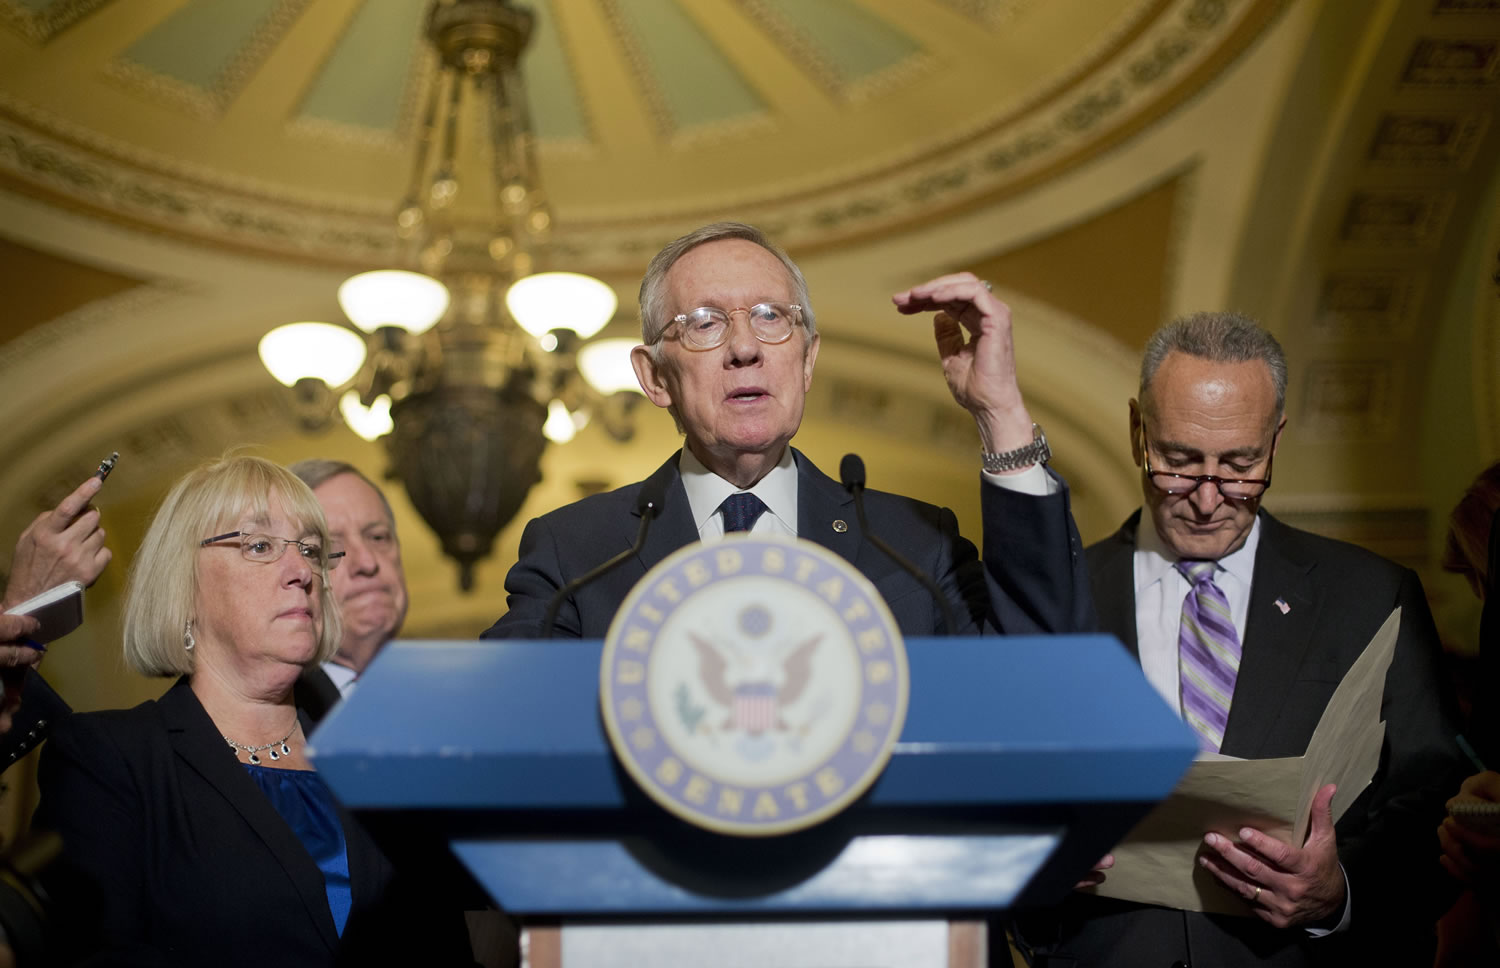 Senate Minority Leader Harry Reid of Nevada, center, speaks to reporters on Capitol Hill in Washington on Wednesday. Joining Reid from left are Sen. Patty Murray, D-Wash., Senate Minority Whip Richard Durbin of Ill.,  left, and Sen. Charles Schumer, D-N.Y., right.